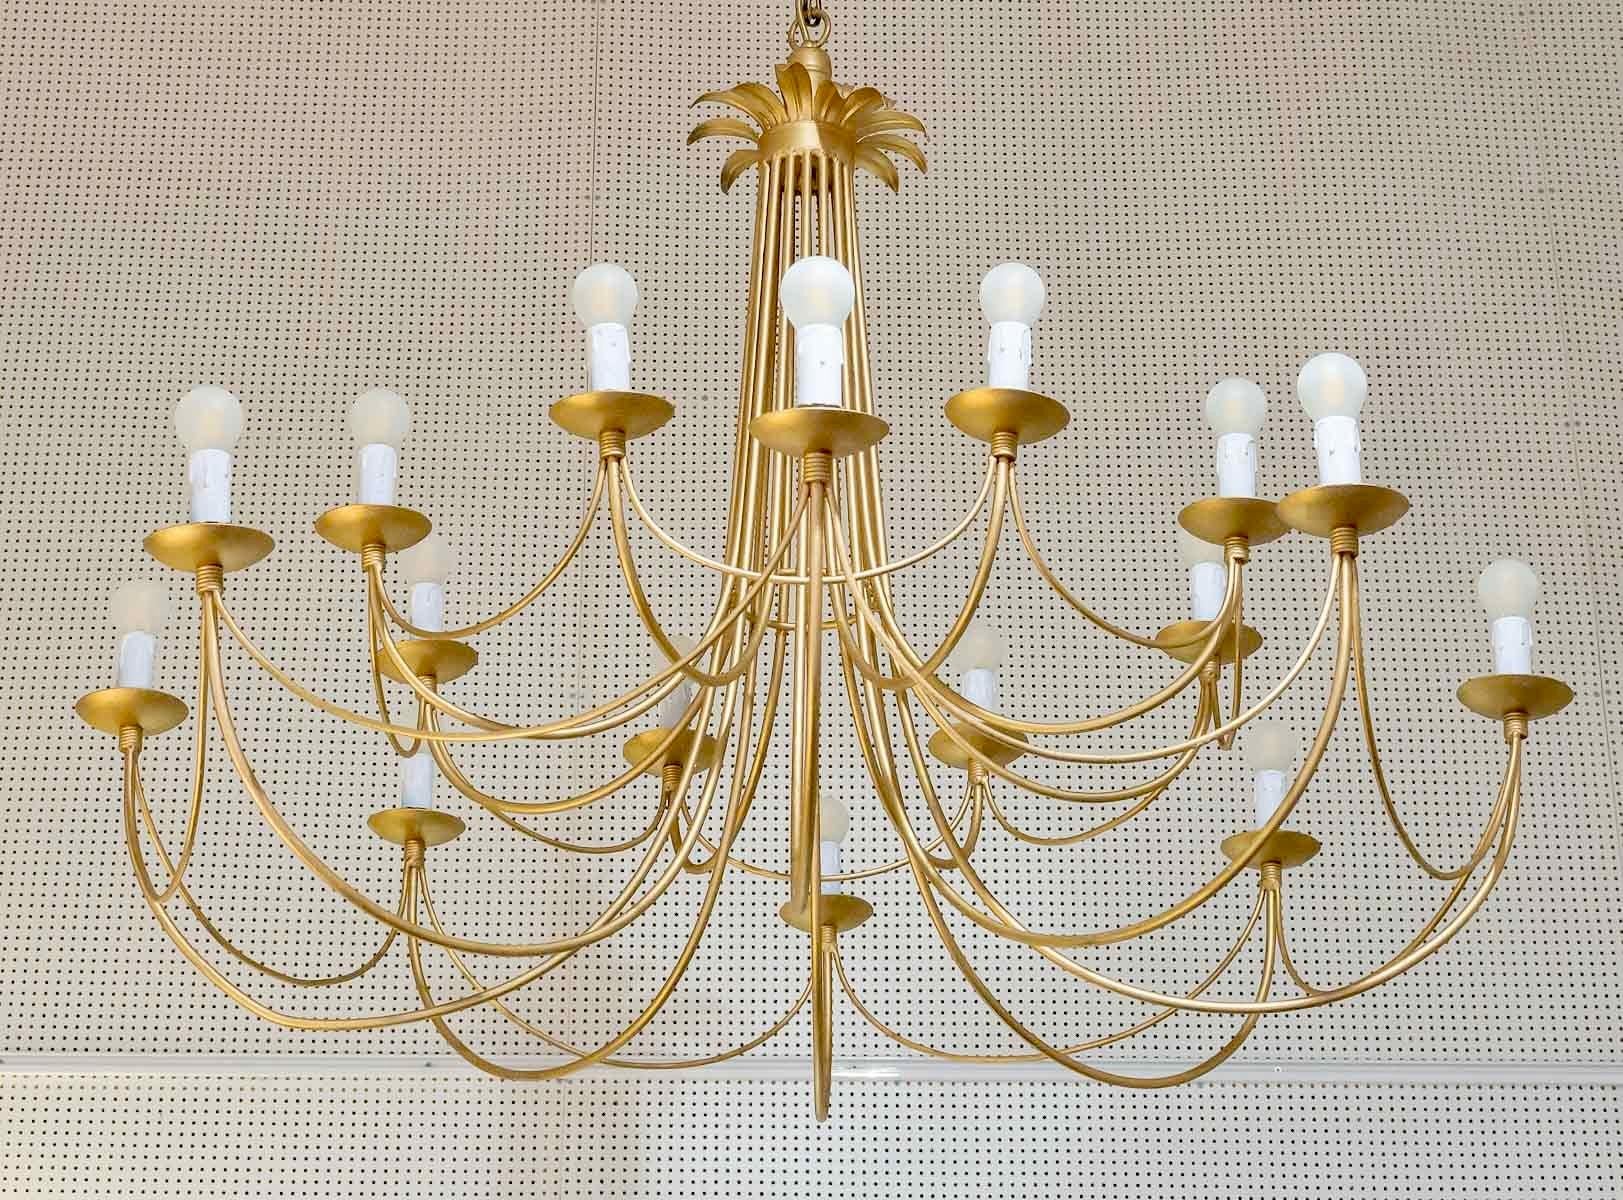 1960 Large 16-light chandelier by Maison Roche
Composed of 16 outward-facing light arms placed around the perimeter on two round levels.
The large circle of 8 arms on the lower part and a smaller circle of 8 arms on the upper part are linked by fine